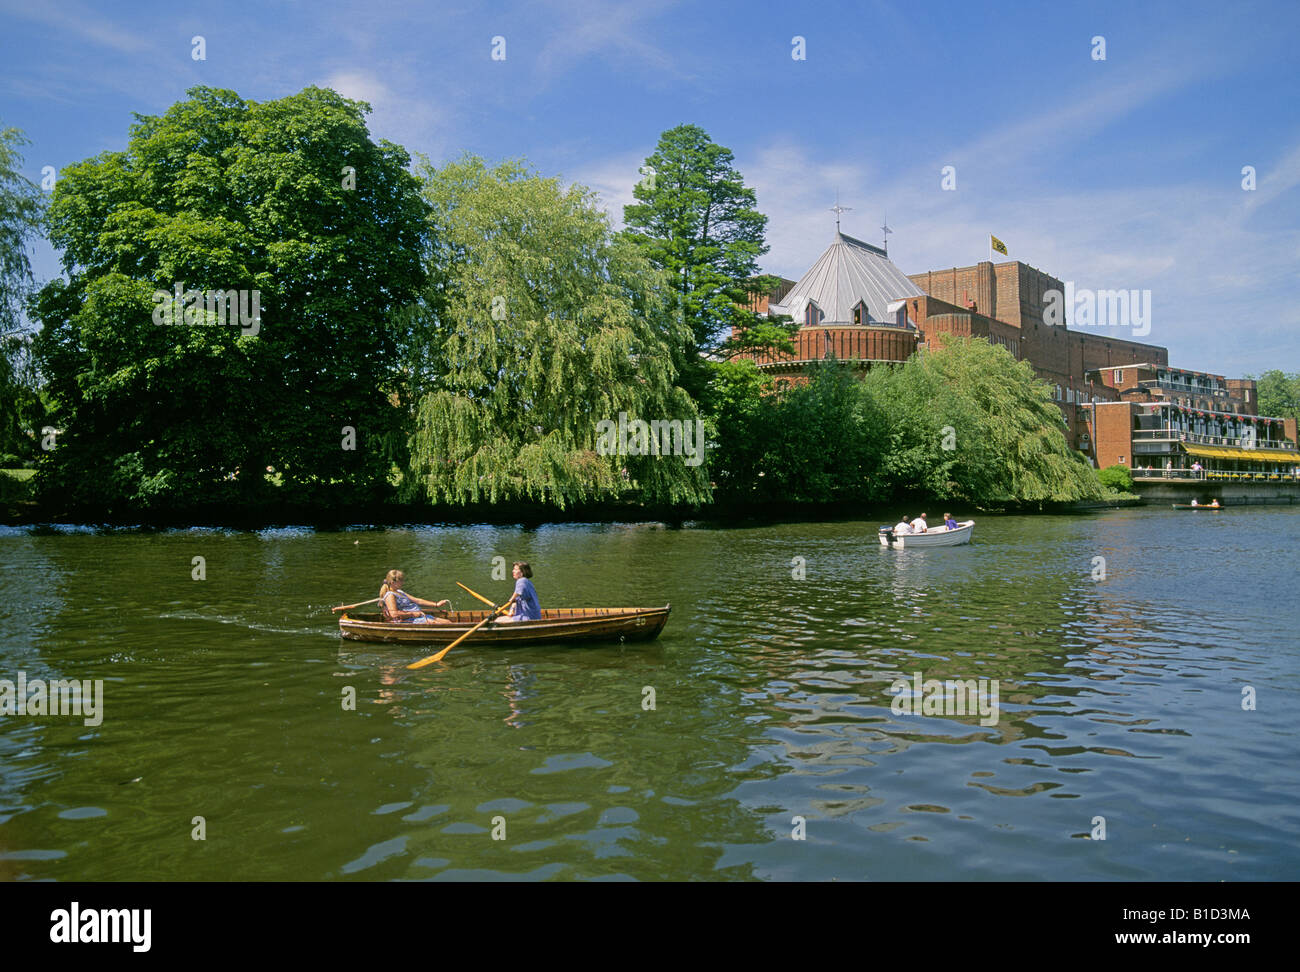 Visitors row a small skiff on the Avon River in Stratford Upon Avon in front of the Royal Shakespeare Theater Stock Photo